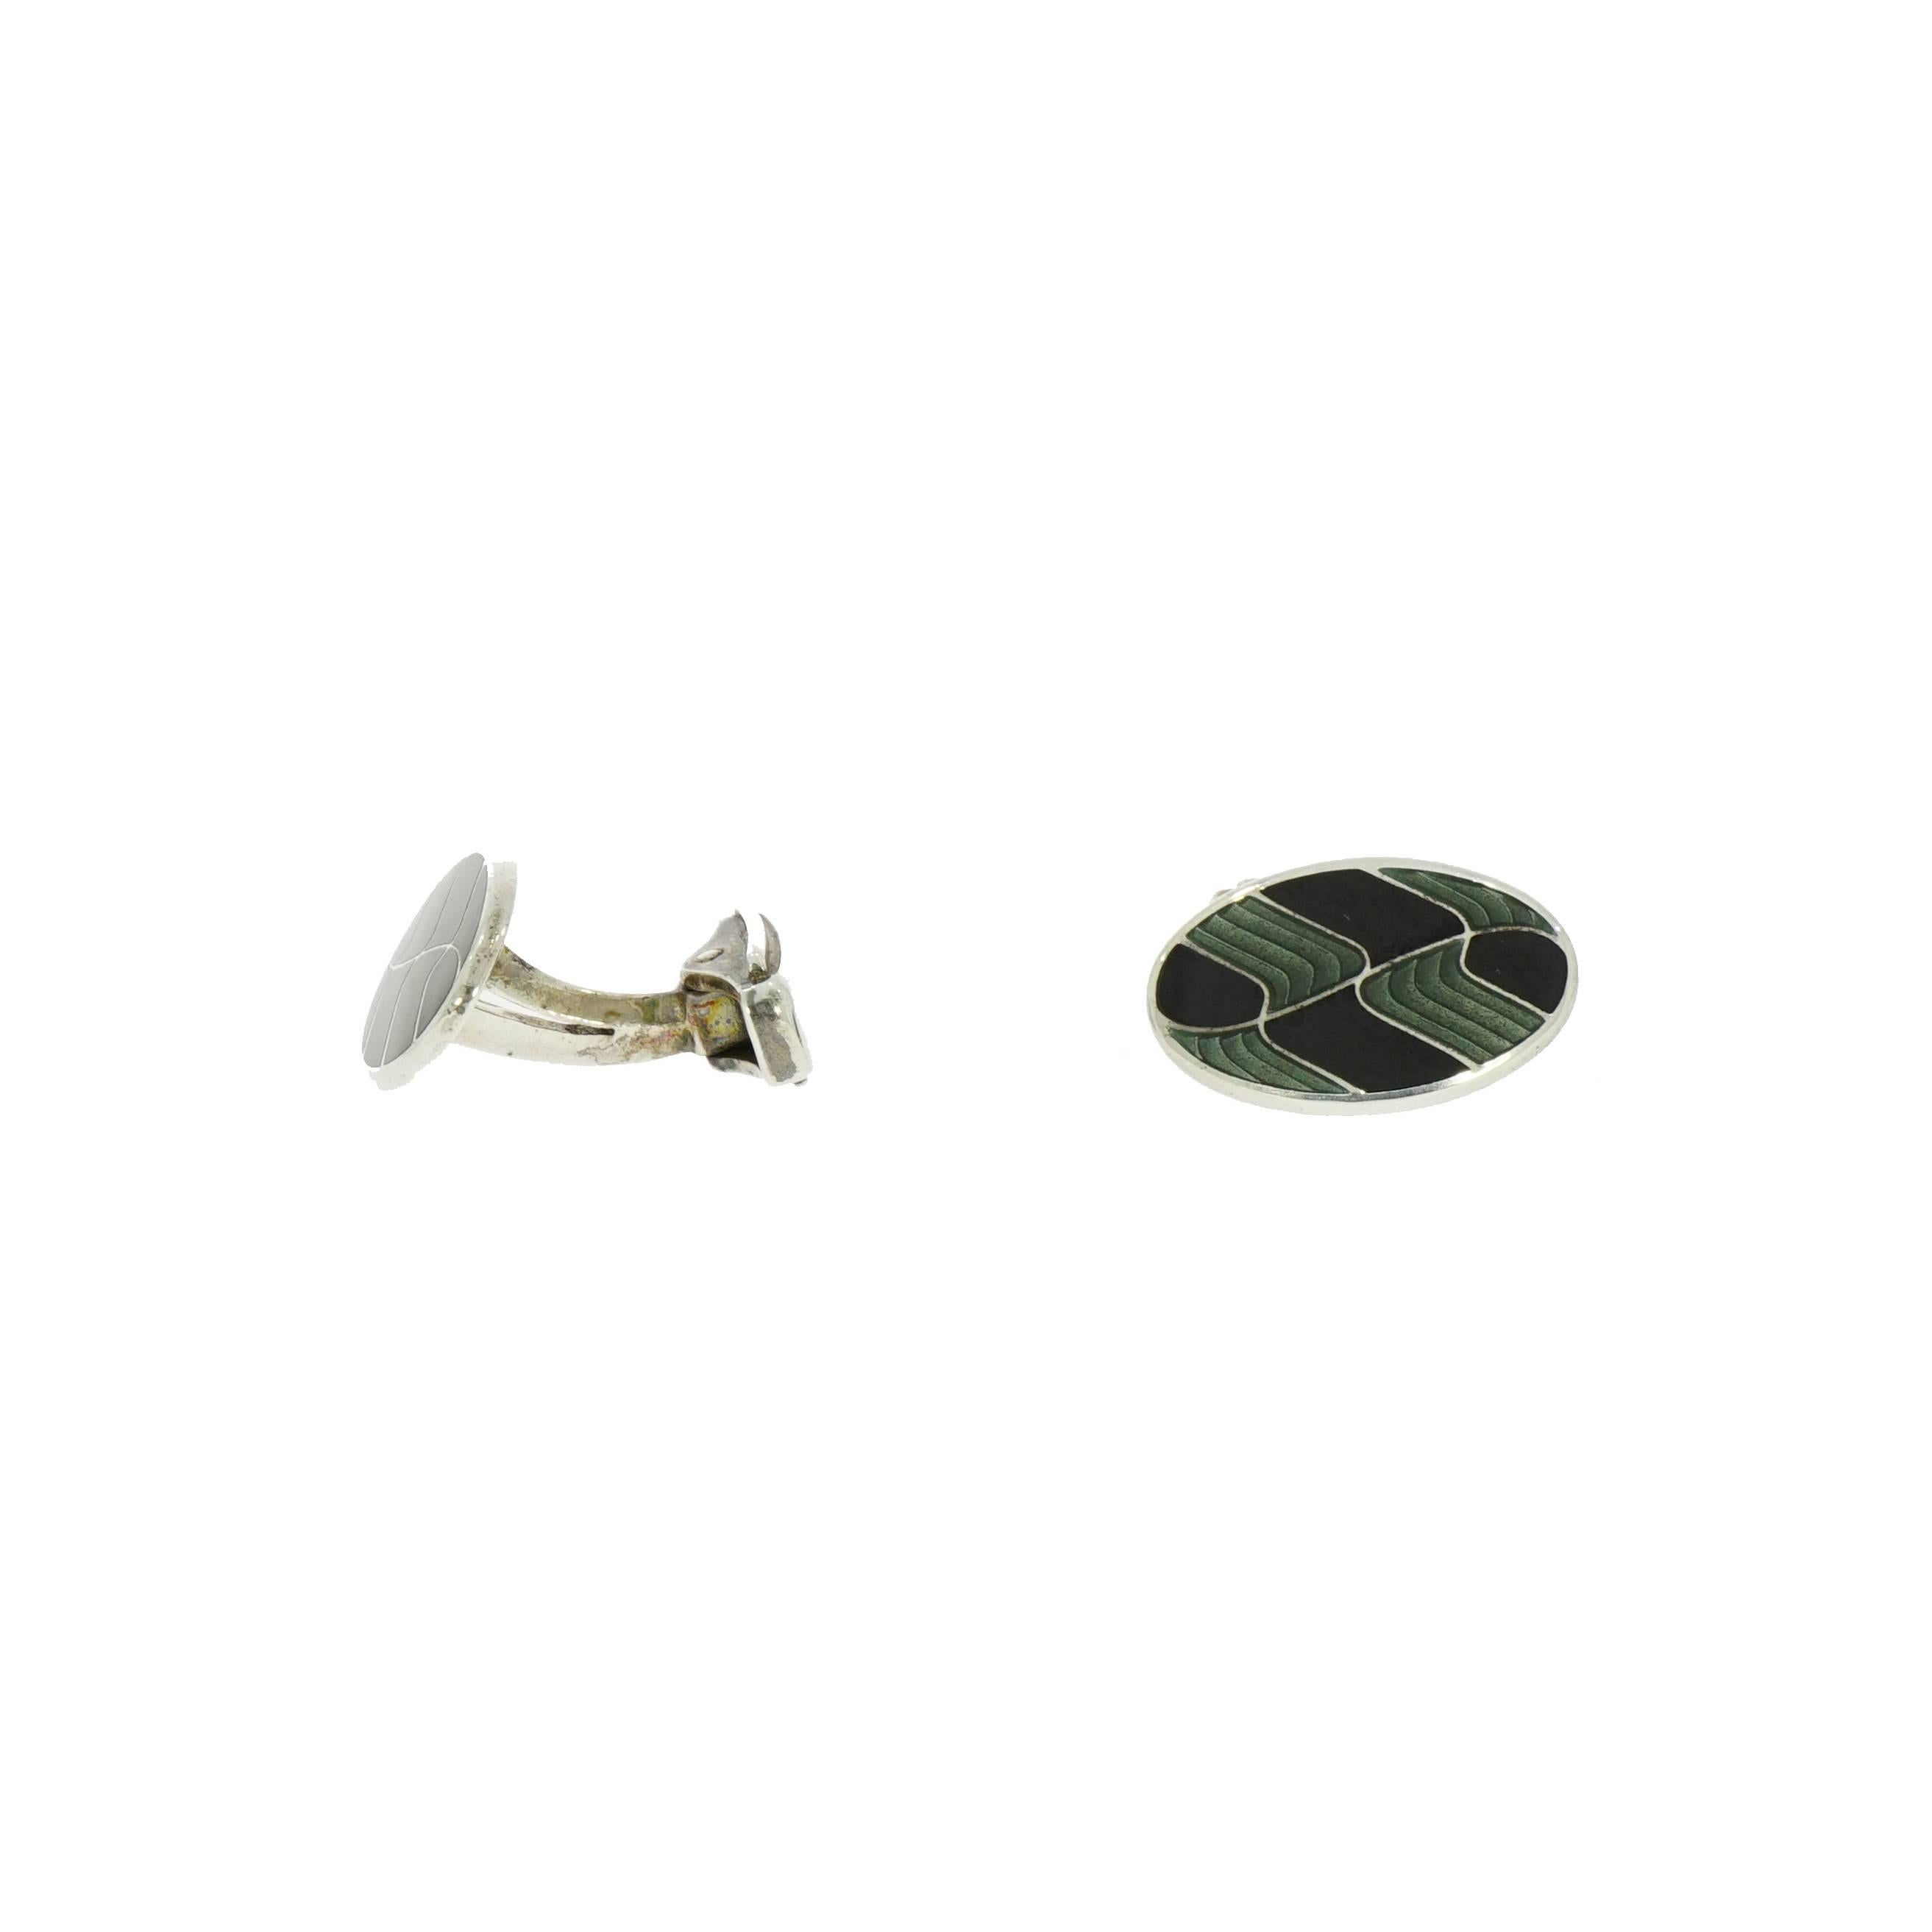 Today's well-dressed man cares about how he looks and enjoys setting himself apart with distinctive accessories like this handsome wavy green/black enameled oval cufflinks designed by Brixton & Gill (England). Handcrafted in sterling silver and